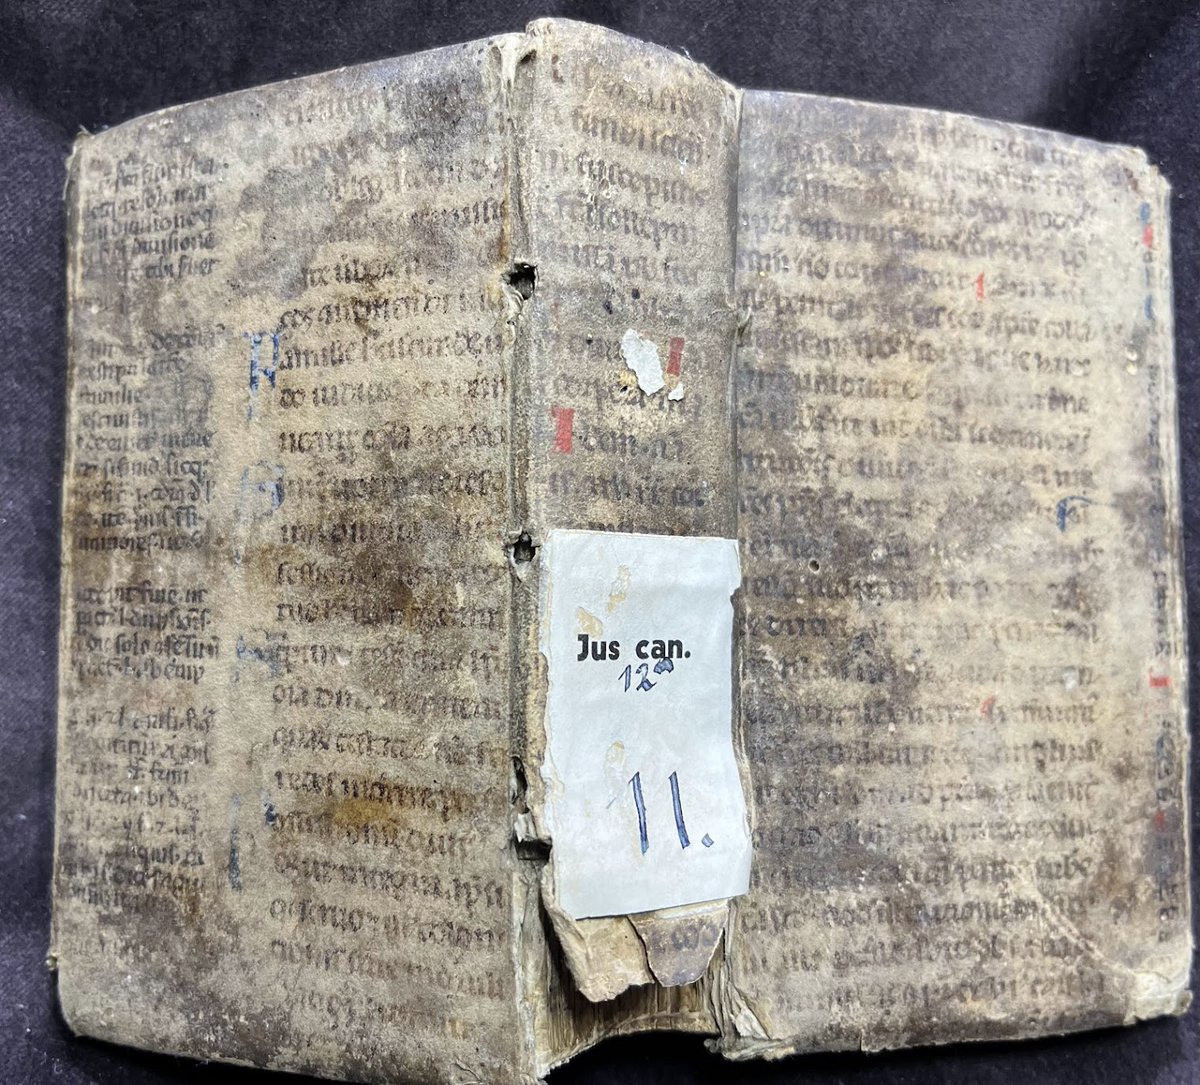 Politicorum Sive Civilis Doctrinae Libri Sex by Justus Lipsius (Lich (Germany) Conrad Neben - 1604) with a great glossed manuscript vellum binding! (unknown text, 15th C?) #fragmentFriday #bookhistory